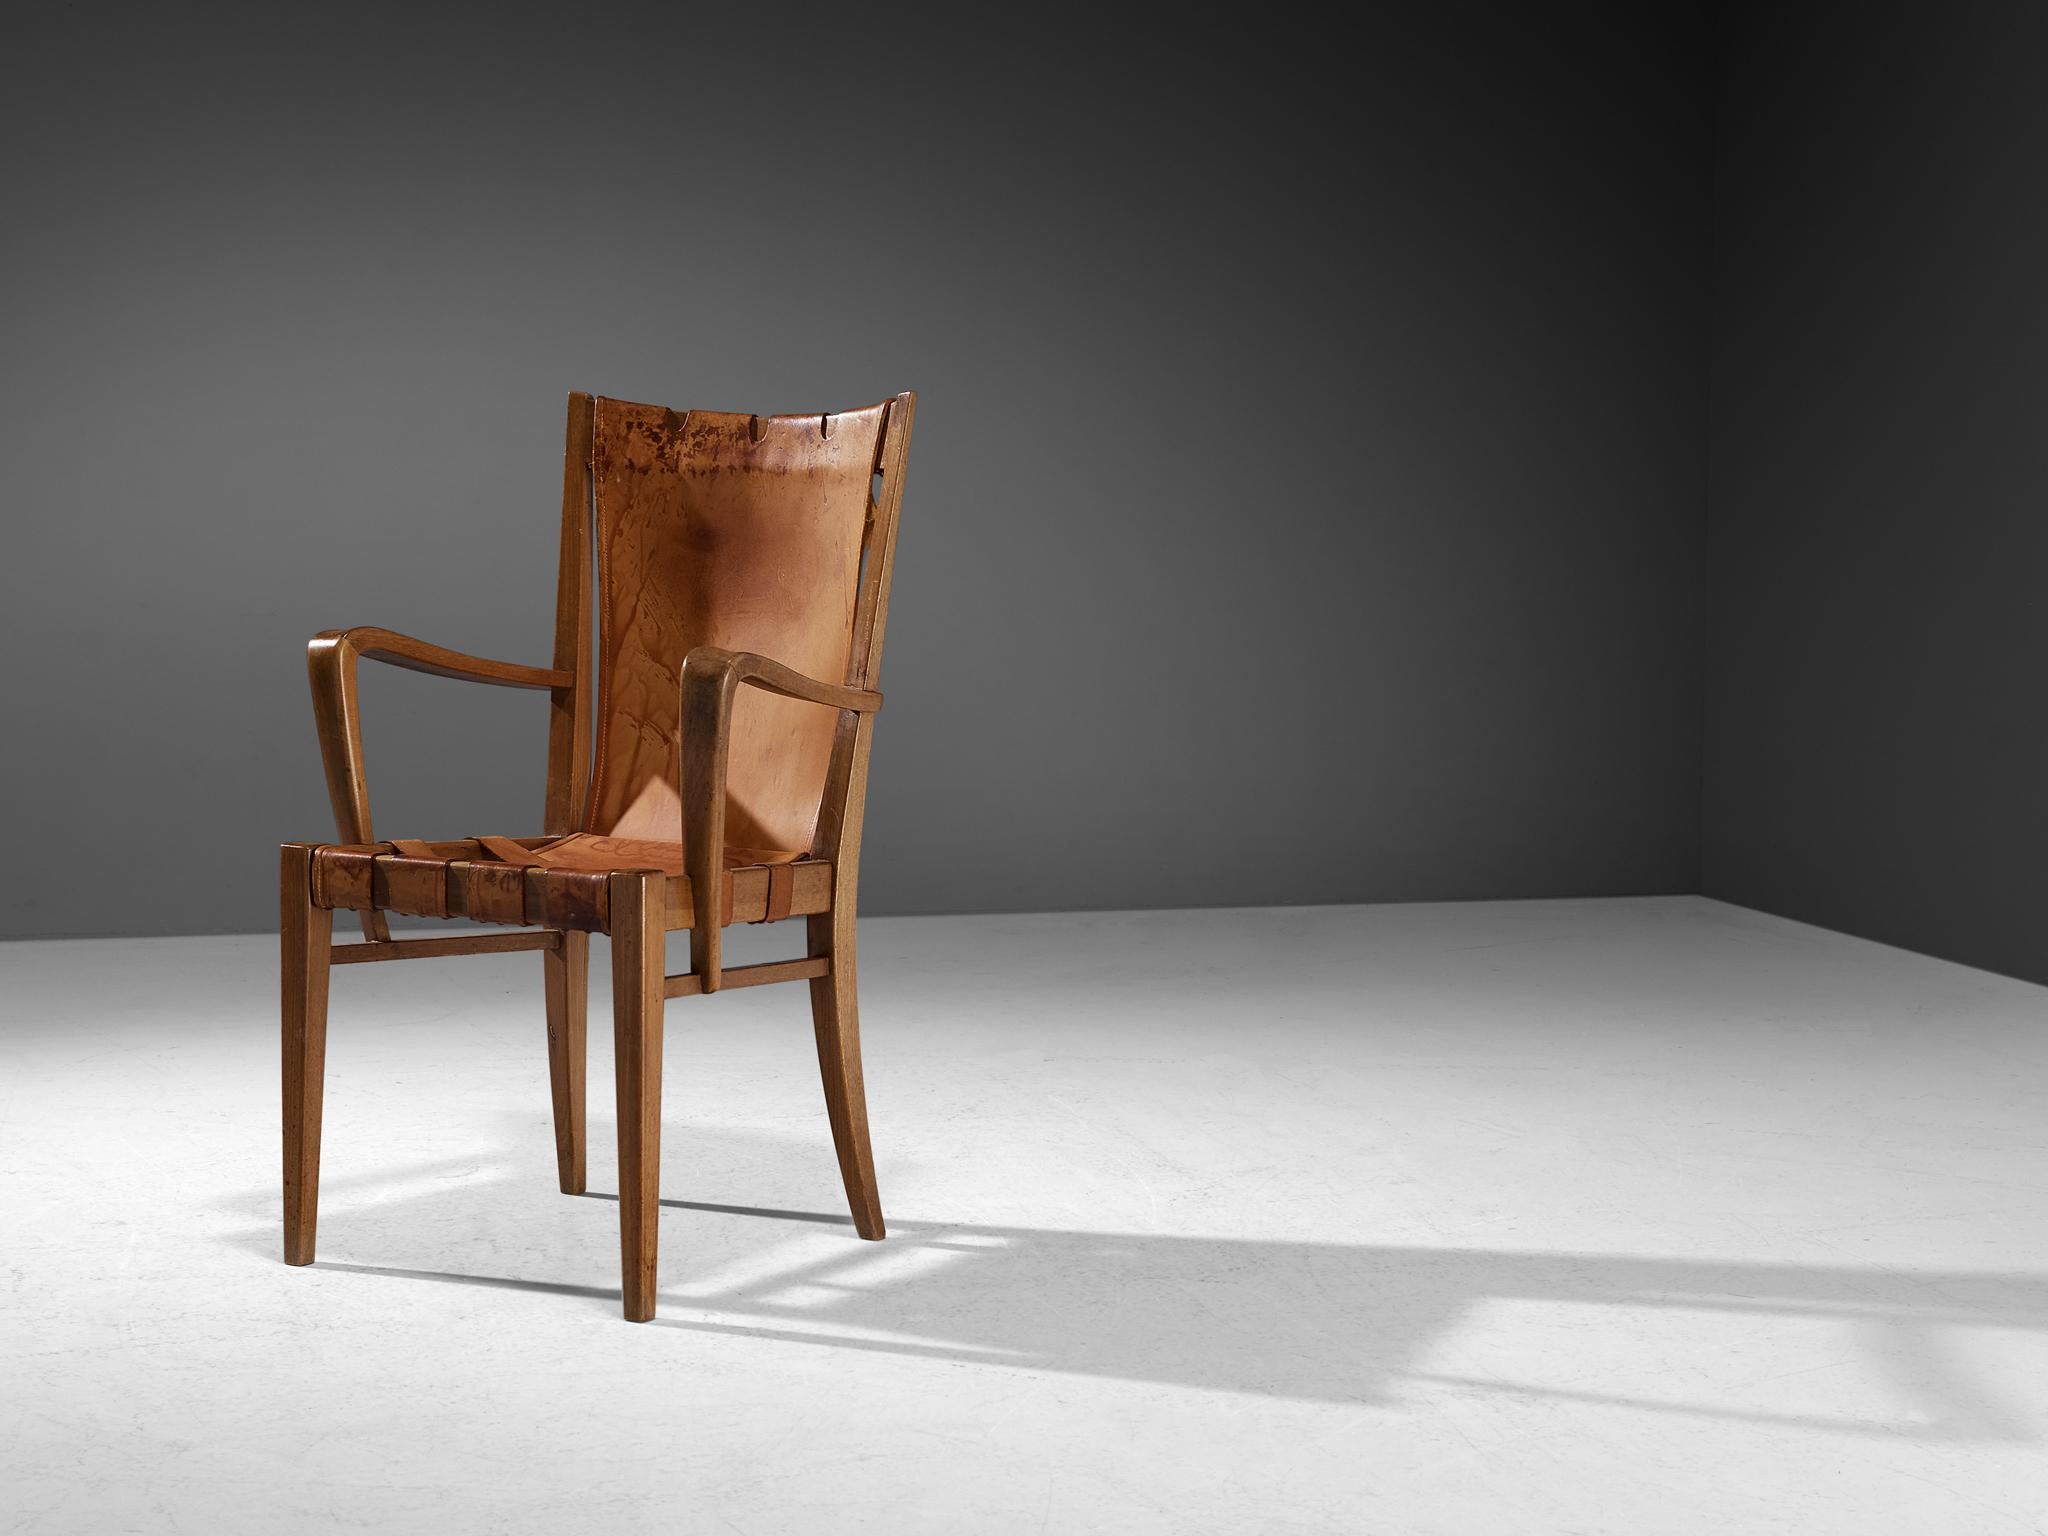 Guglielmo Pecorini, armchair, walnut, leather, brass, Italy, circa. 1940 

This wonderfully sculpted lounge chair is designed by Italian designer Guglielmo Pecorini The sincere construction and type of upholstery, give the chair a character of its